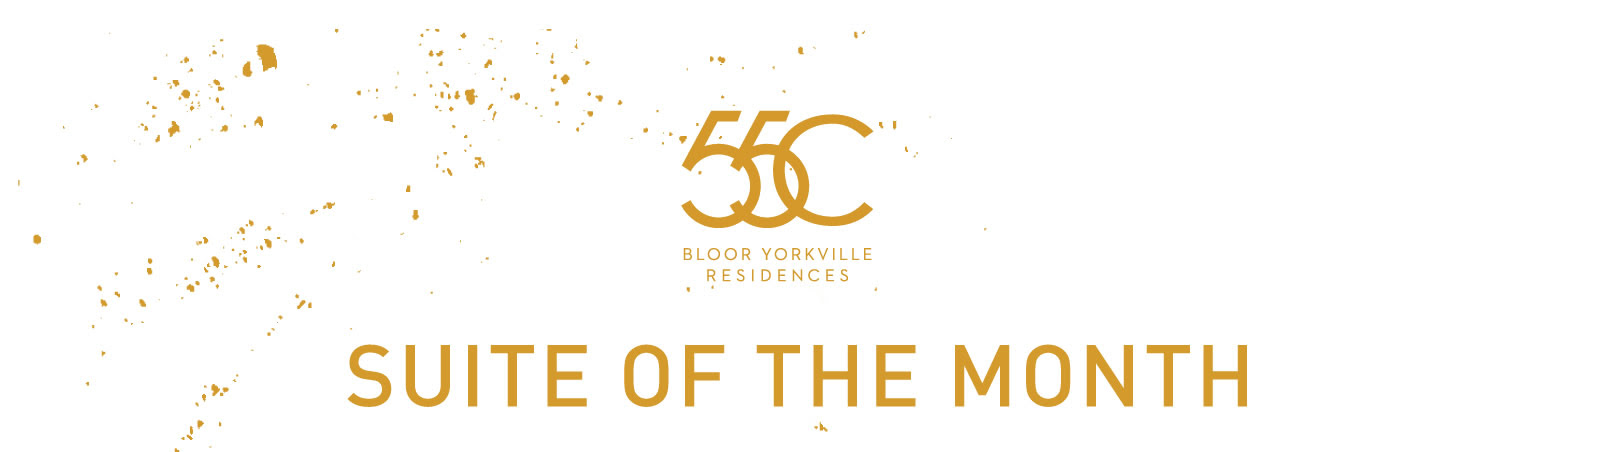 55C - SUITE OF THE MONTH